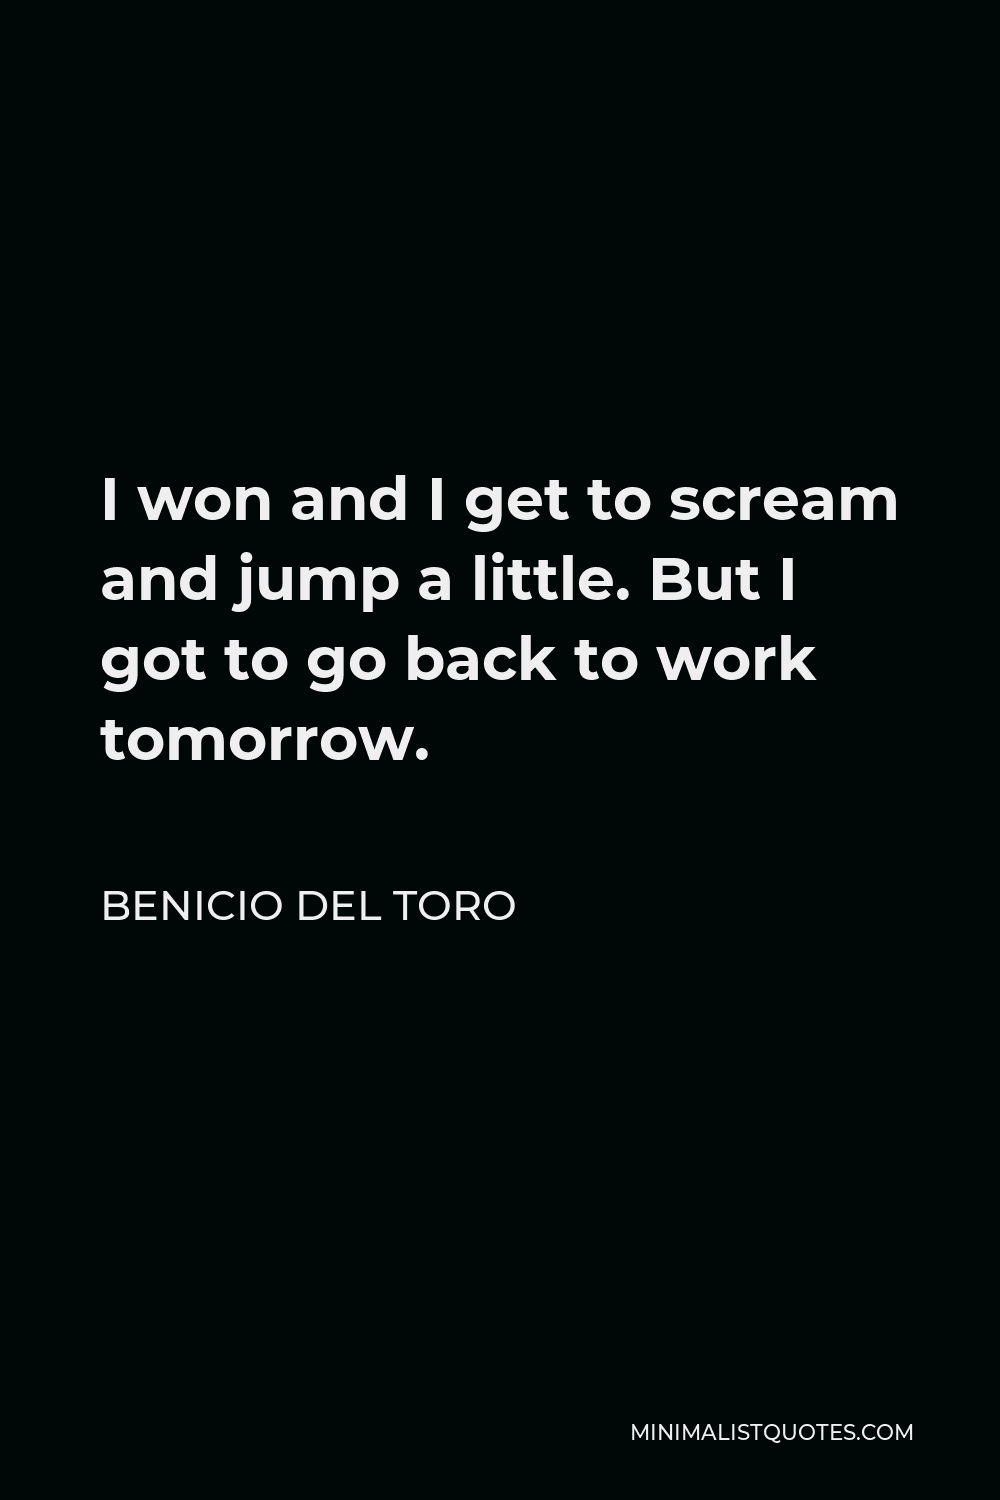 Benicio Del Toro Quote - I won and I get to scream and jump a little. But I got to go back to work tomorrow.